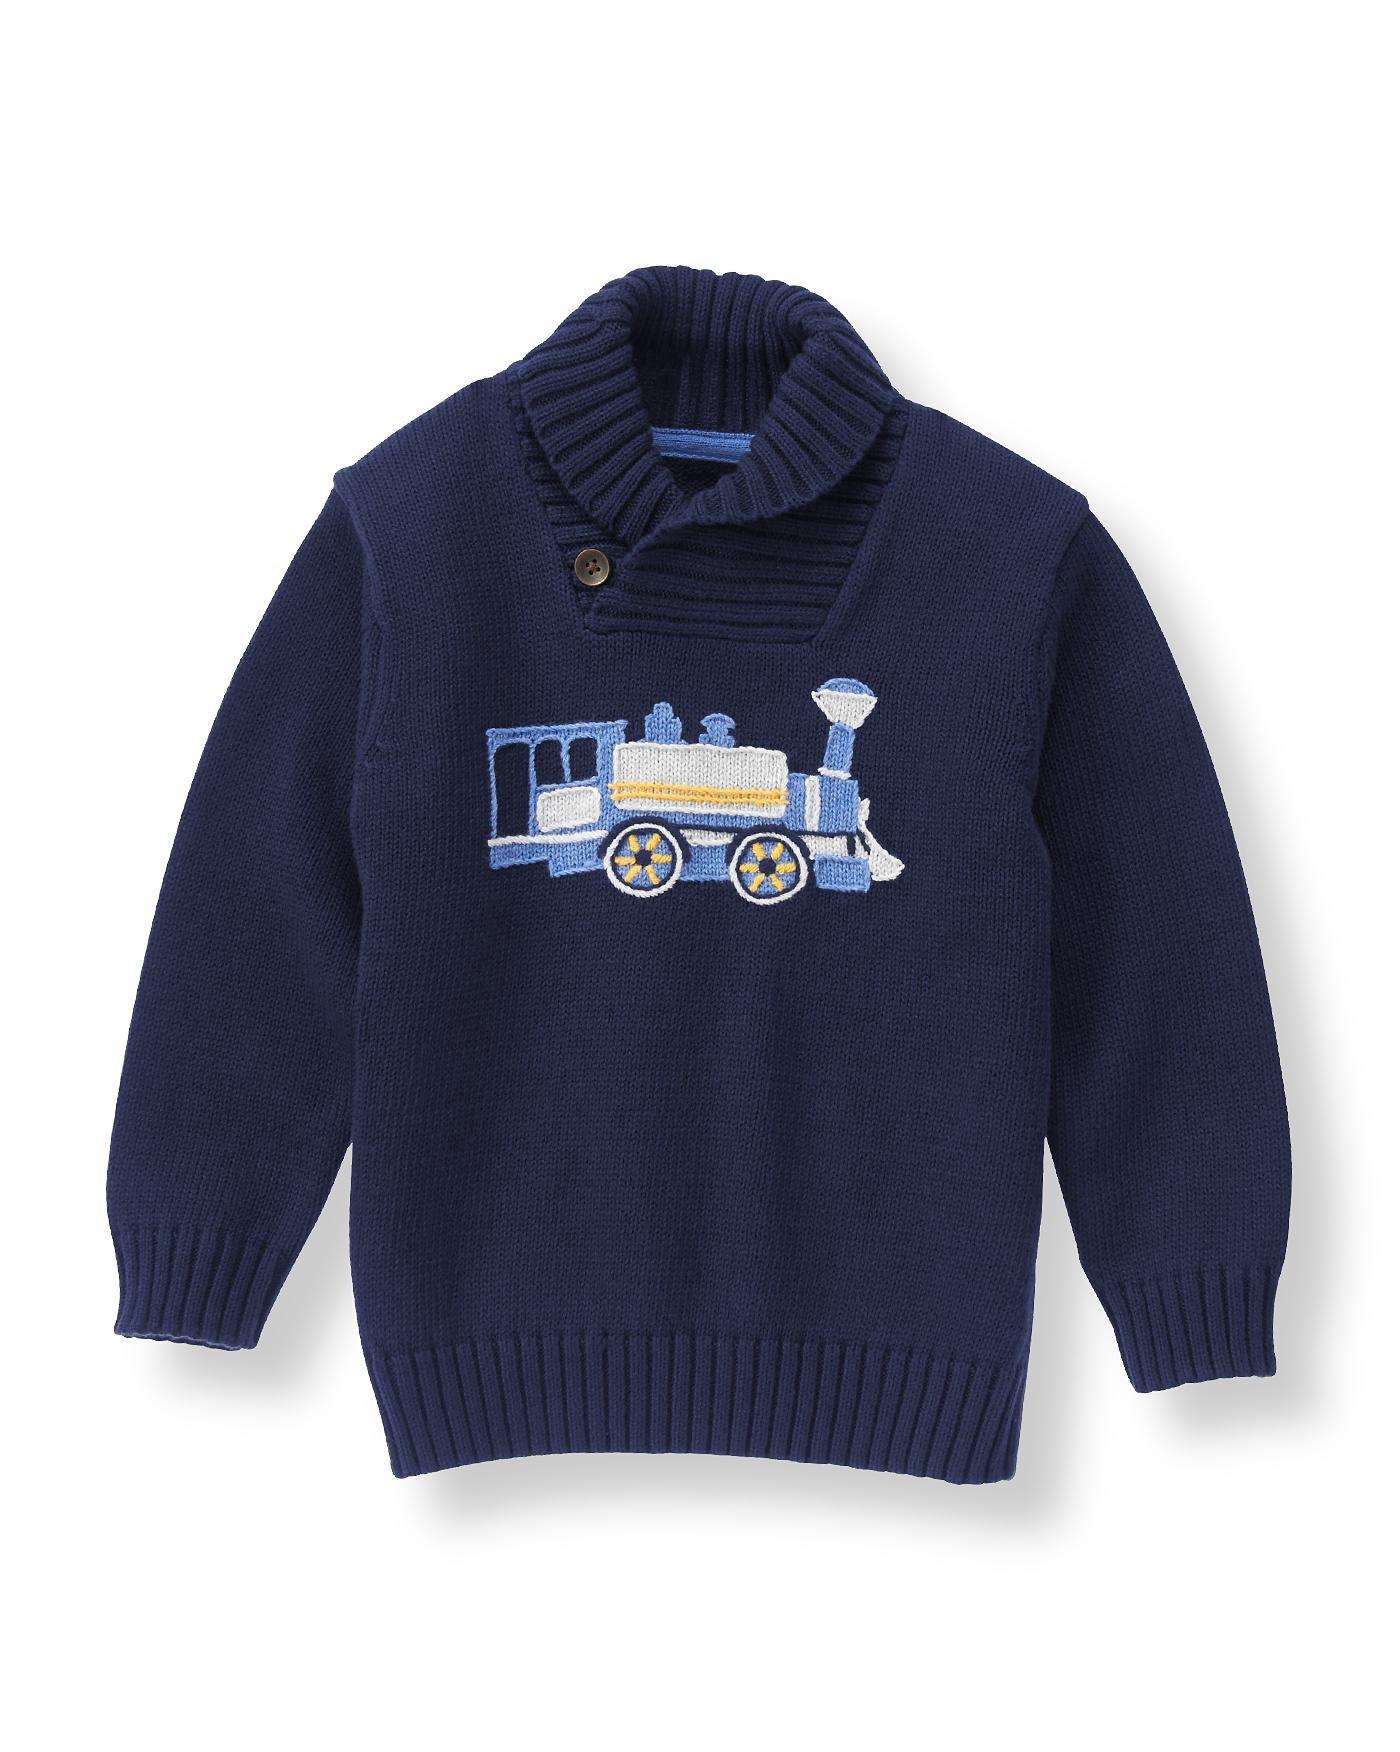 Train Sweater image number 0